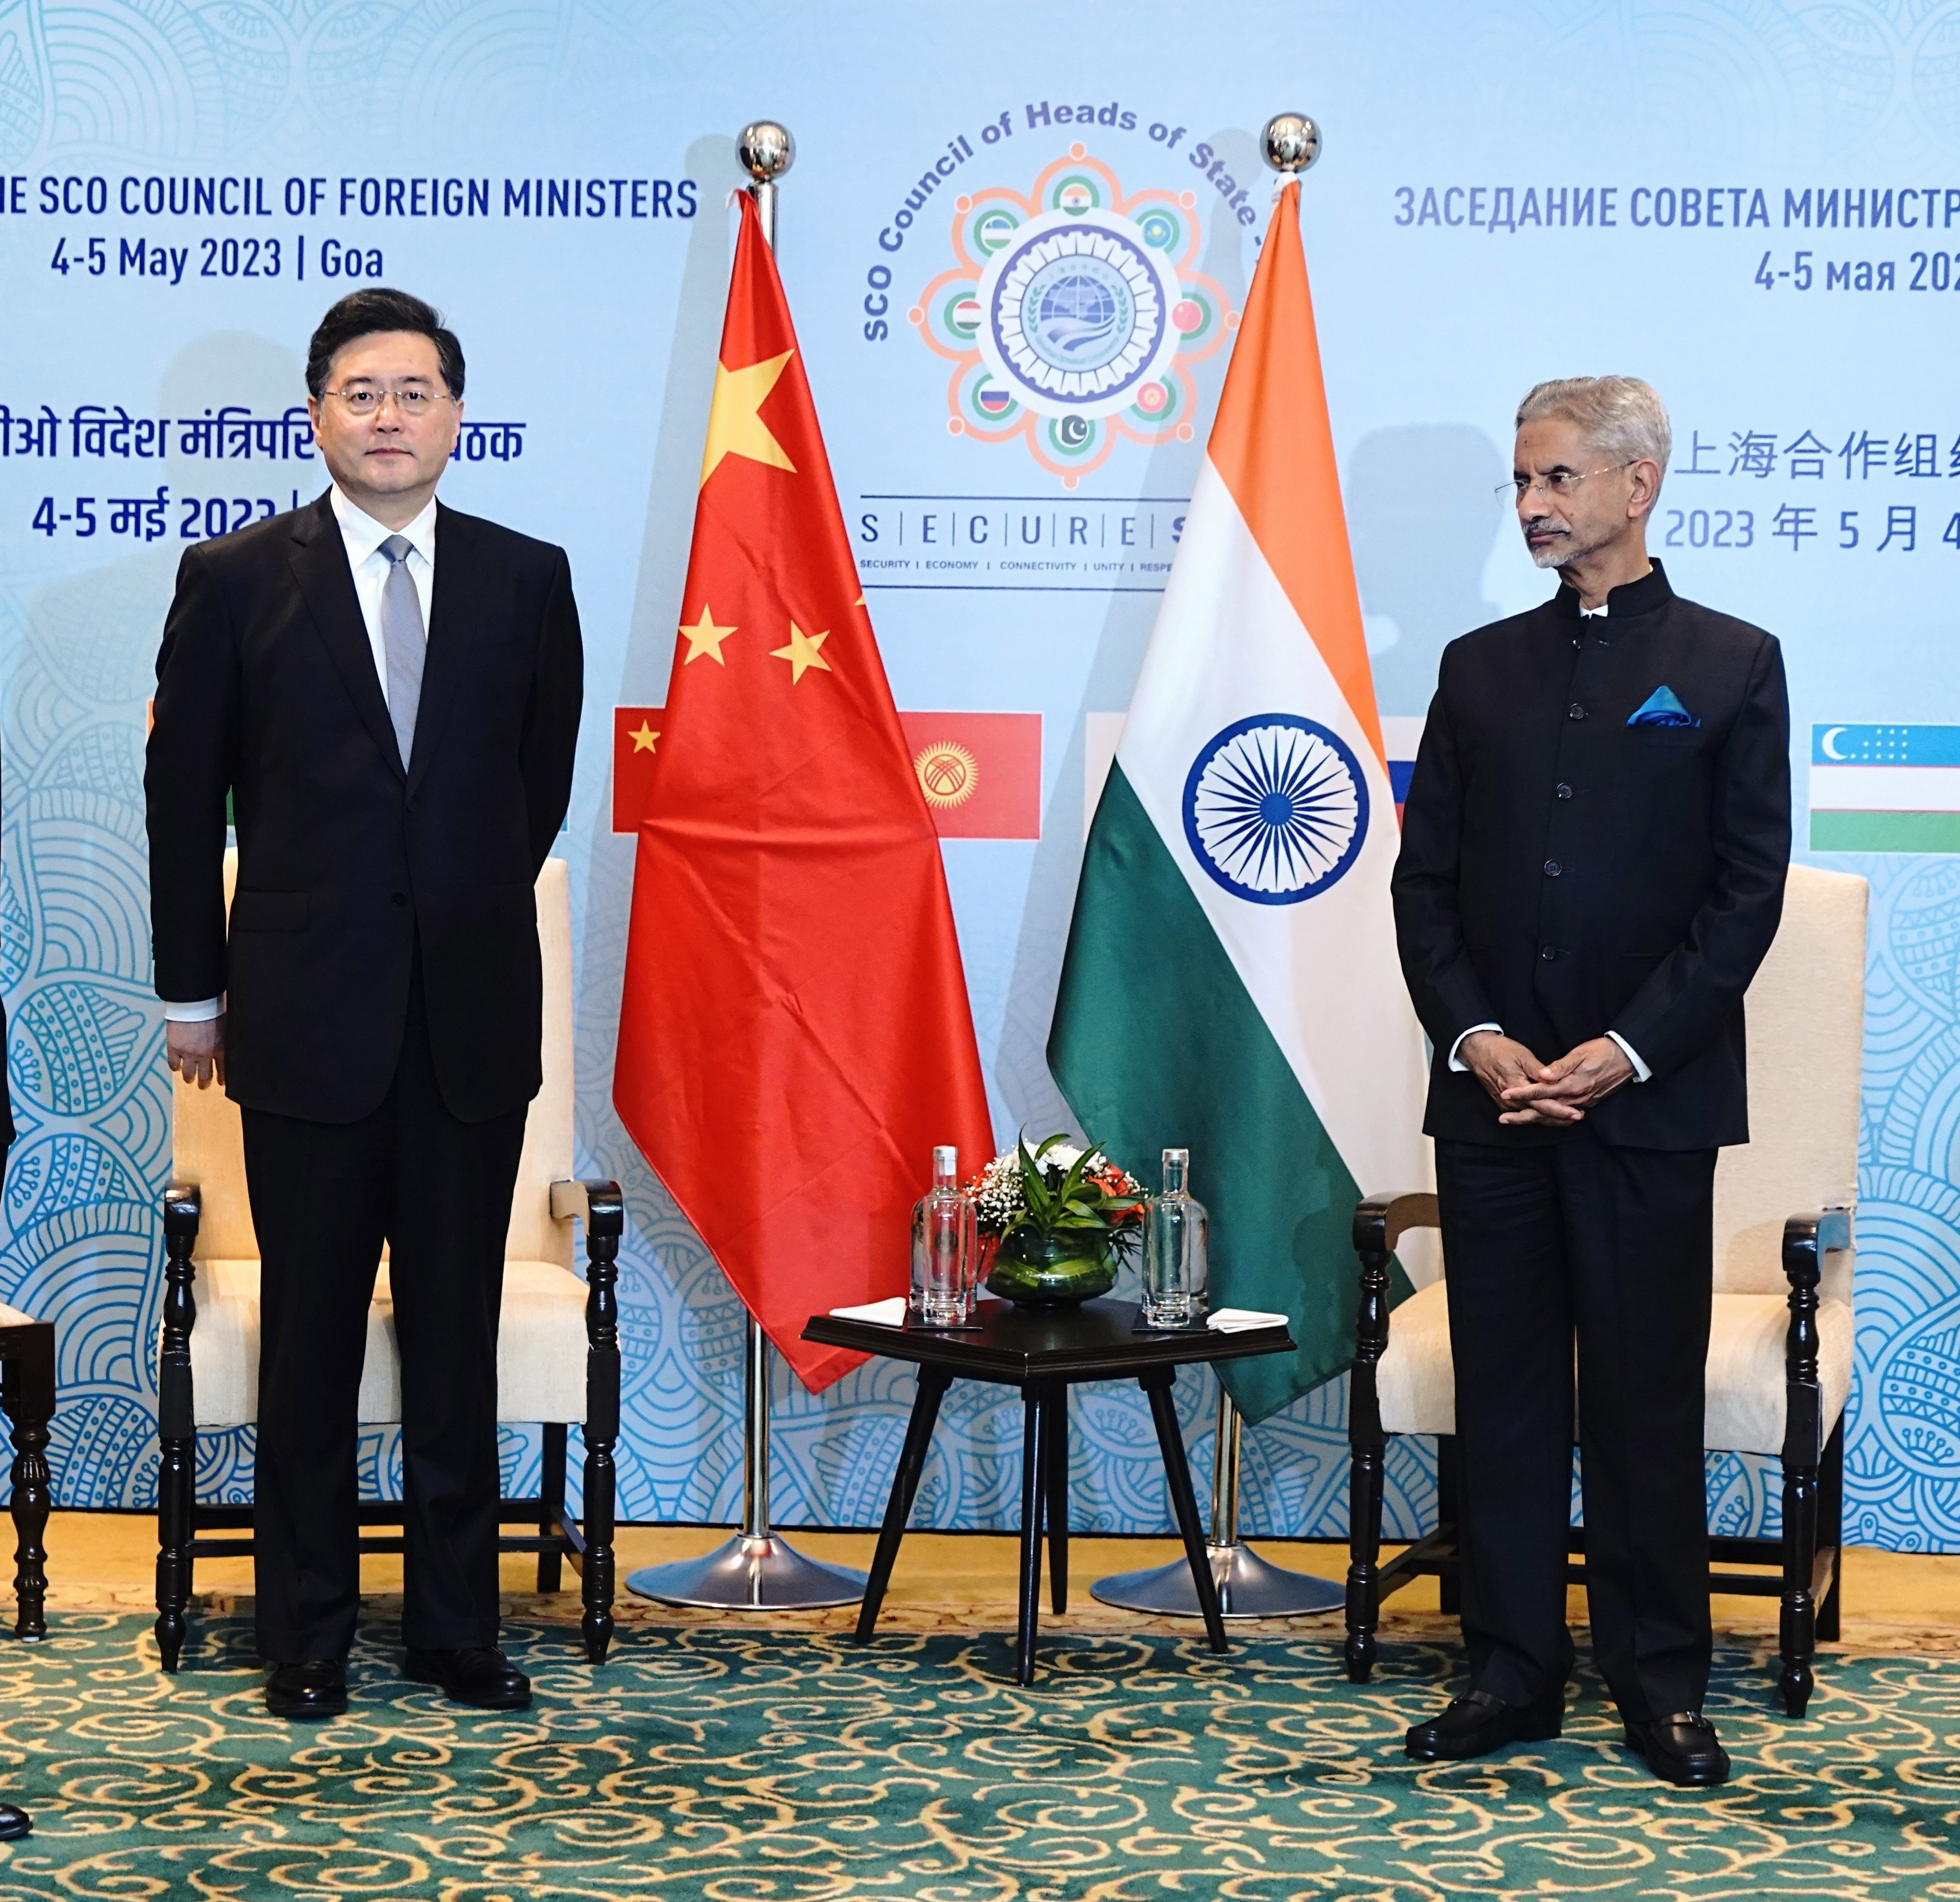 Chinese Foreign Minister Qin Gang and Indian External Affairs Minister S. Jaishankar at the  Shanghai Cooperation Organisation (SCO) foreign ministers meeting in Goa on Thursday. Photo: Indian Ministry of External Affairs/EPA-EFE